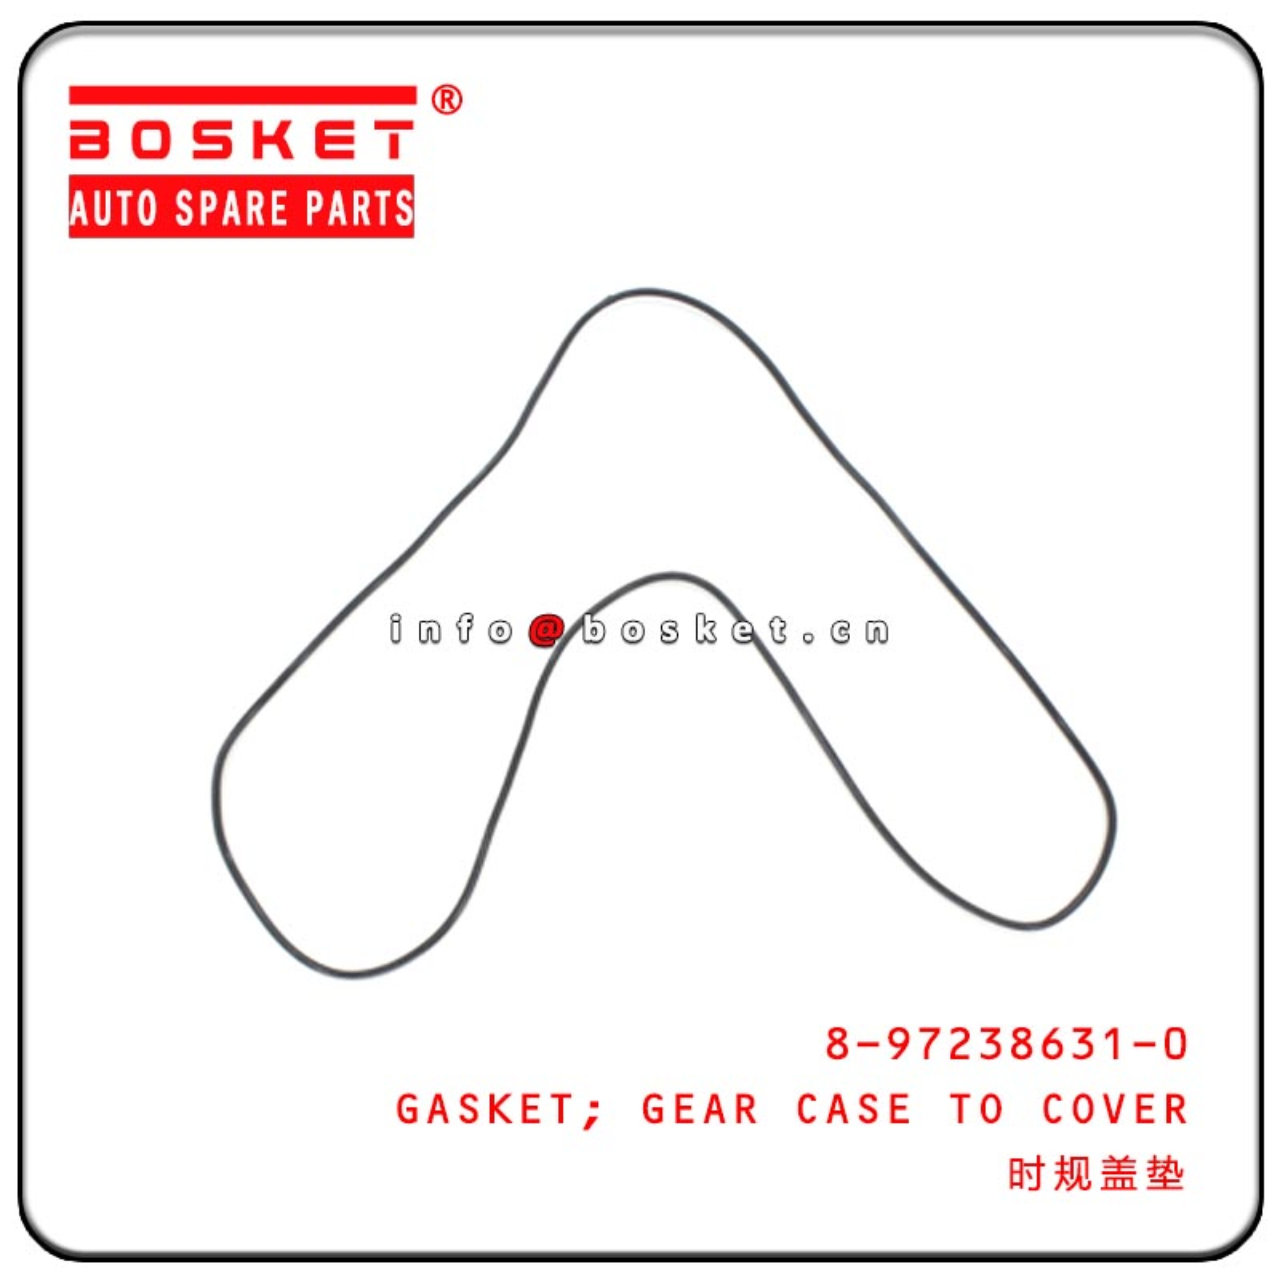  8-97238631-0 8972386310 Gear Case To Cover Gasket Suitable For ISUZU 4JB1 NKR55